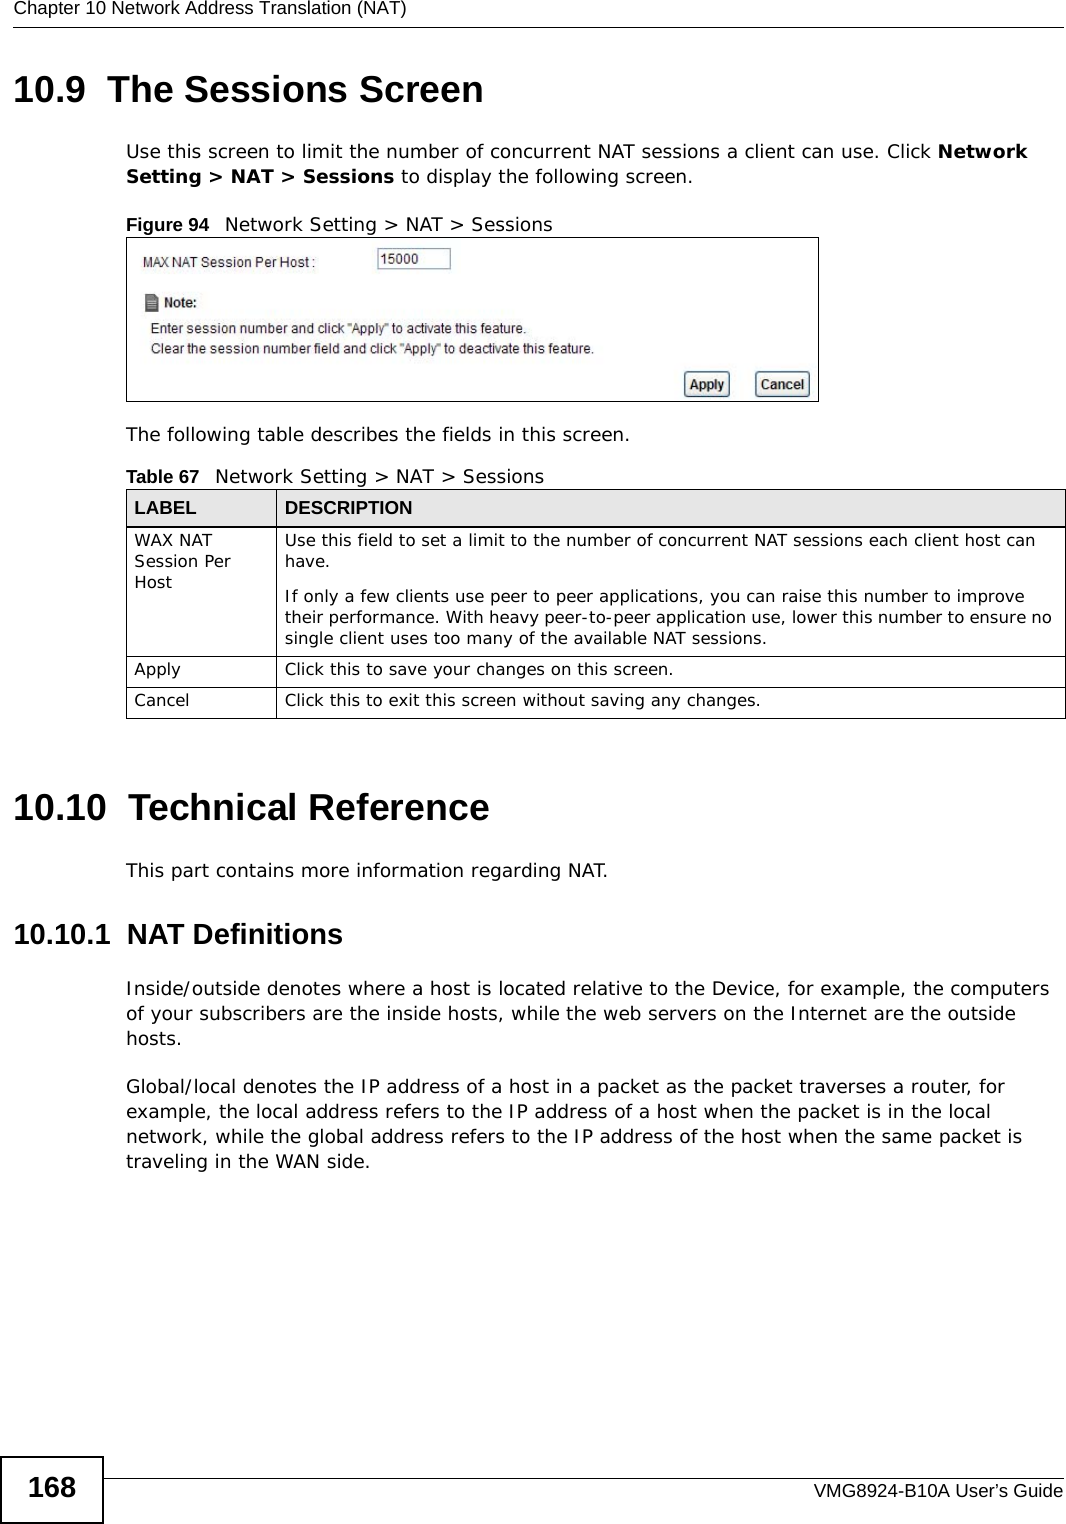 Chapter 10 Network Address Translation (NAT)VMG8924-B10A User’s Guide16810.9  The Sessions ScreenUse this screen to limit the number of concurrent NAT sessions a client can use. Click Network Setting &gt; NAT &gt; Sessions to display the following screen. Figure 94   Network Setting &gt; NAT &gt; SessionsThe following table describes the fields in this screen.10.10  Technical ReferenceThis part contains more information regarding NAT.10.10.1  NAT DefinitionsInside/outside denotes where a host is located relative to the Device, for example, the computers of your subscribers are the inside hosts, while the web servers on the Internet are the outside hosts. Global/local denotes the IP address of a host in a packet as the packet traverses a router, for example, the local address refers to the IP address of a host when the packet is in the local network, while the global address refers to the IP address of the host when the same packet is traveling in the WAN side. Table 67   Network Setting &gt; NAT &gt; SessionsLABEL DESCRIPTIONWAX NAT Session Per HostUse this field to set a limit to the number of concurrent NAT sessions each client host can have.If only a few clients use peer to peer applications, you can raise this number to improve their performance. With heavy peer-to-peer application use, lower this number to ensure no single client uses too many of the available NAT sessions.Apply Click this to save your changes on this screen.Cancel Click this to exit this screen without saving any changes.